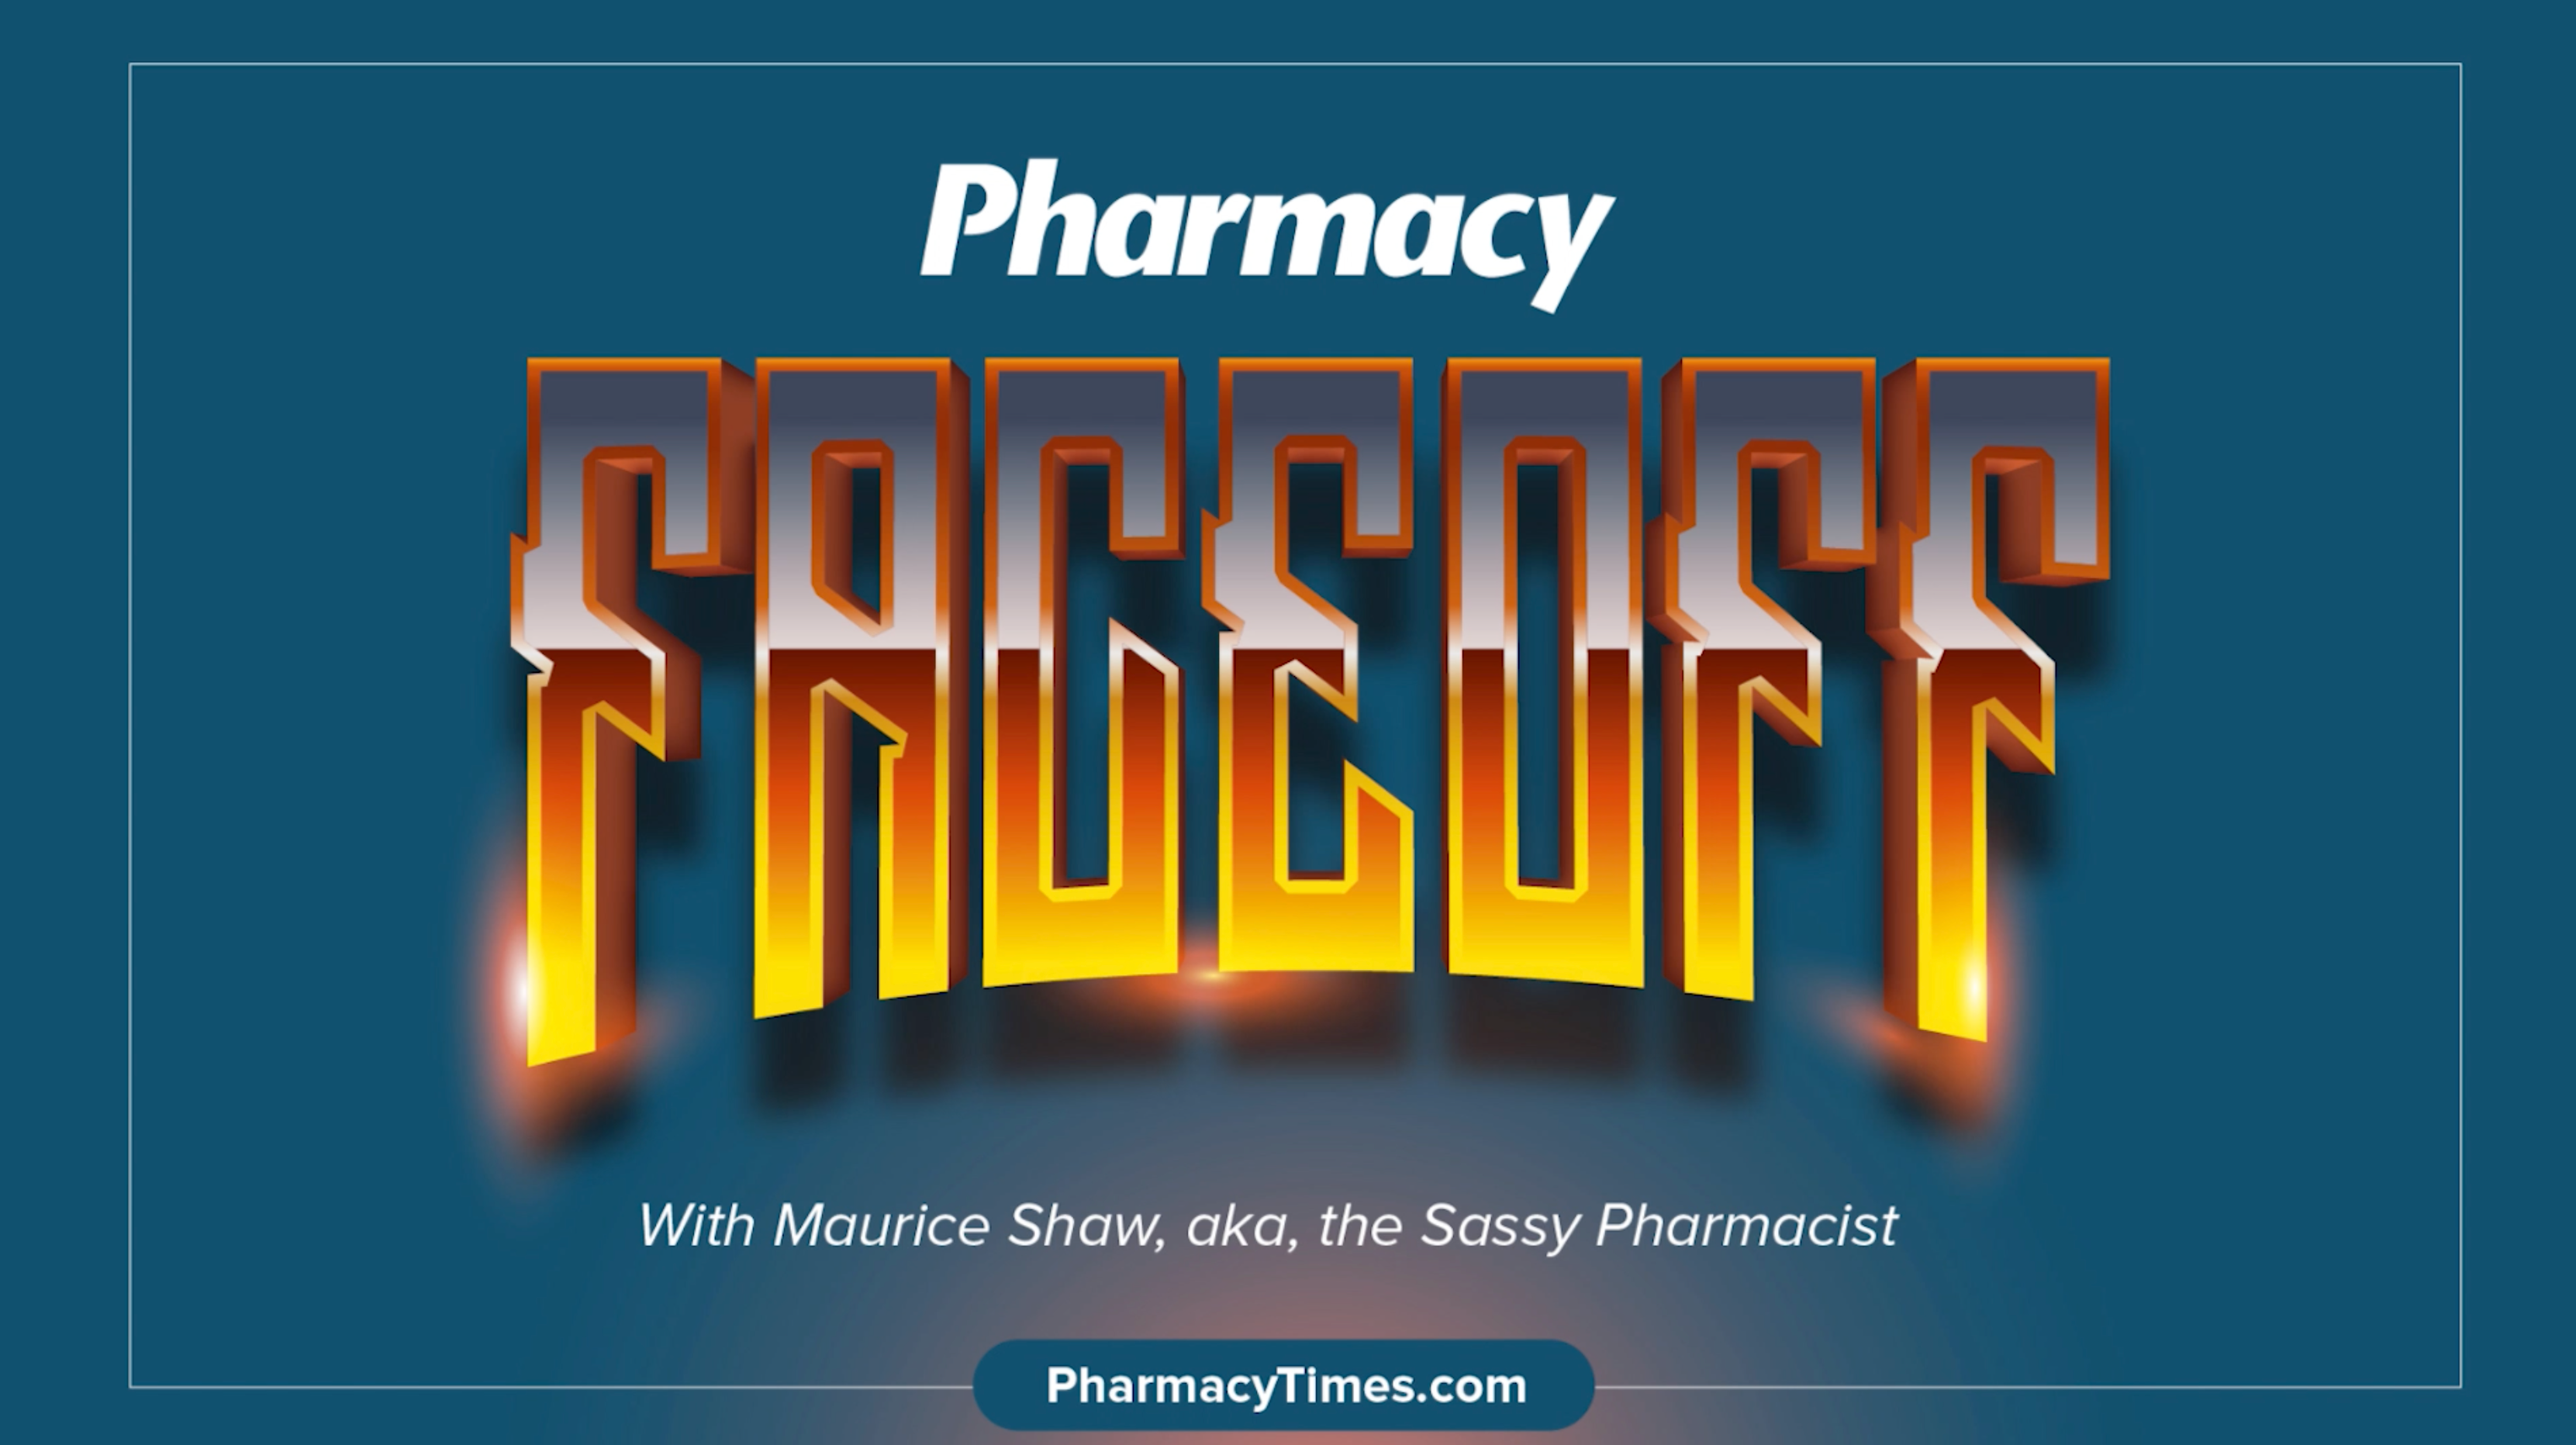 University of the Sciences and Rutgers Pharmacy Schools Go Head-to-Head in New Pharmacy Times® Game Show